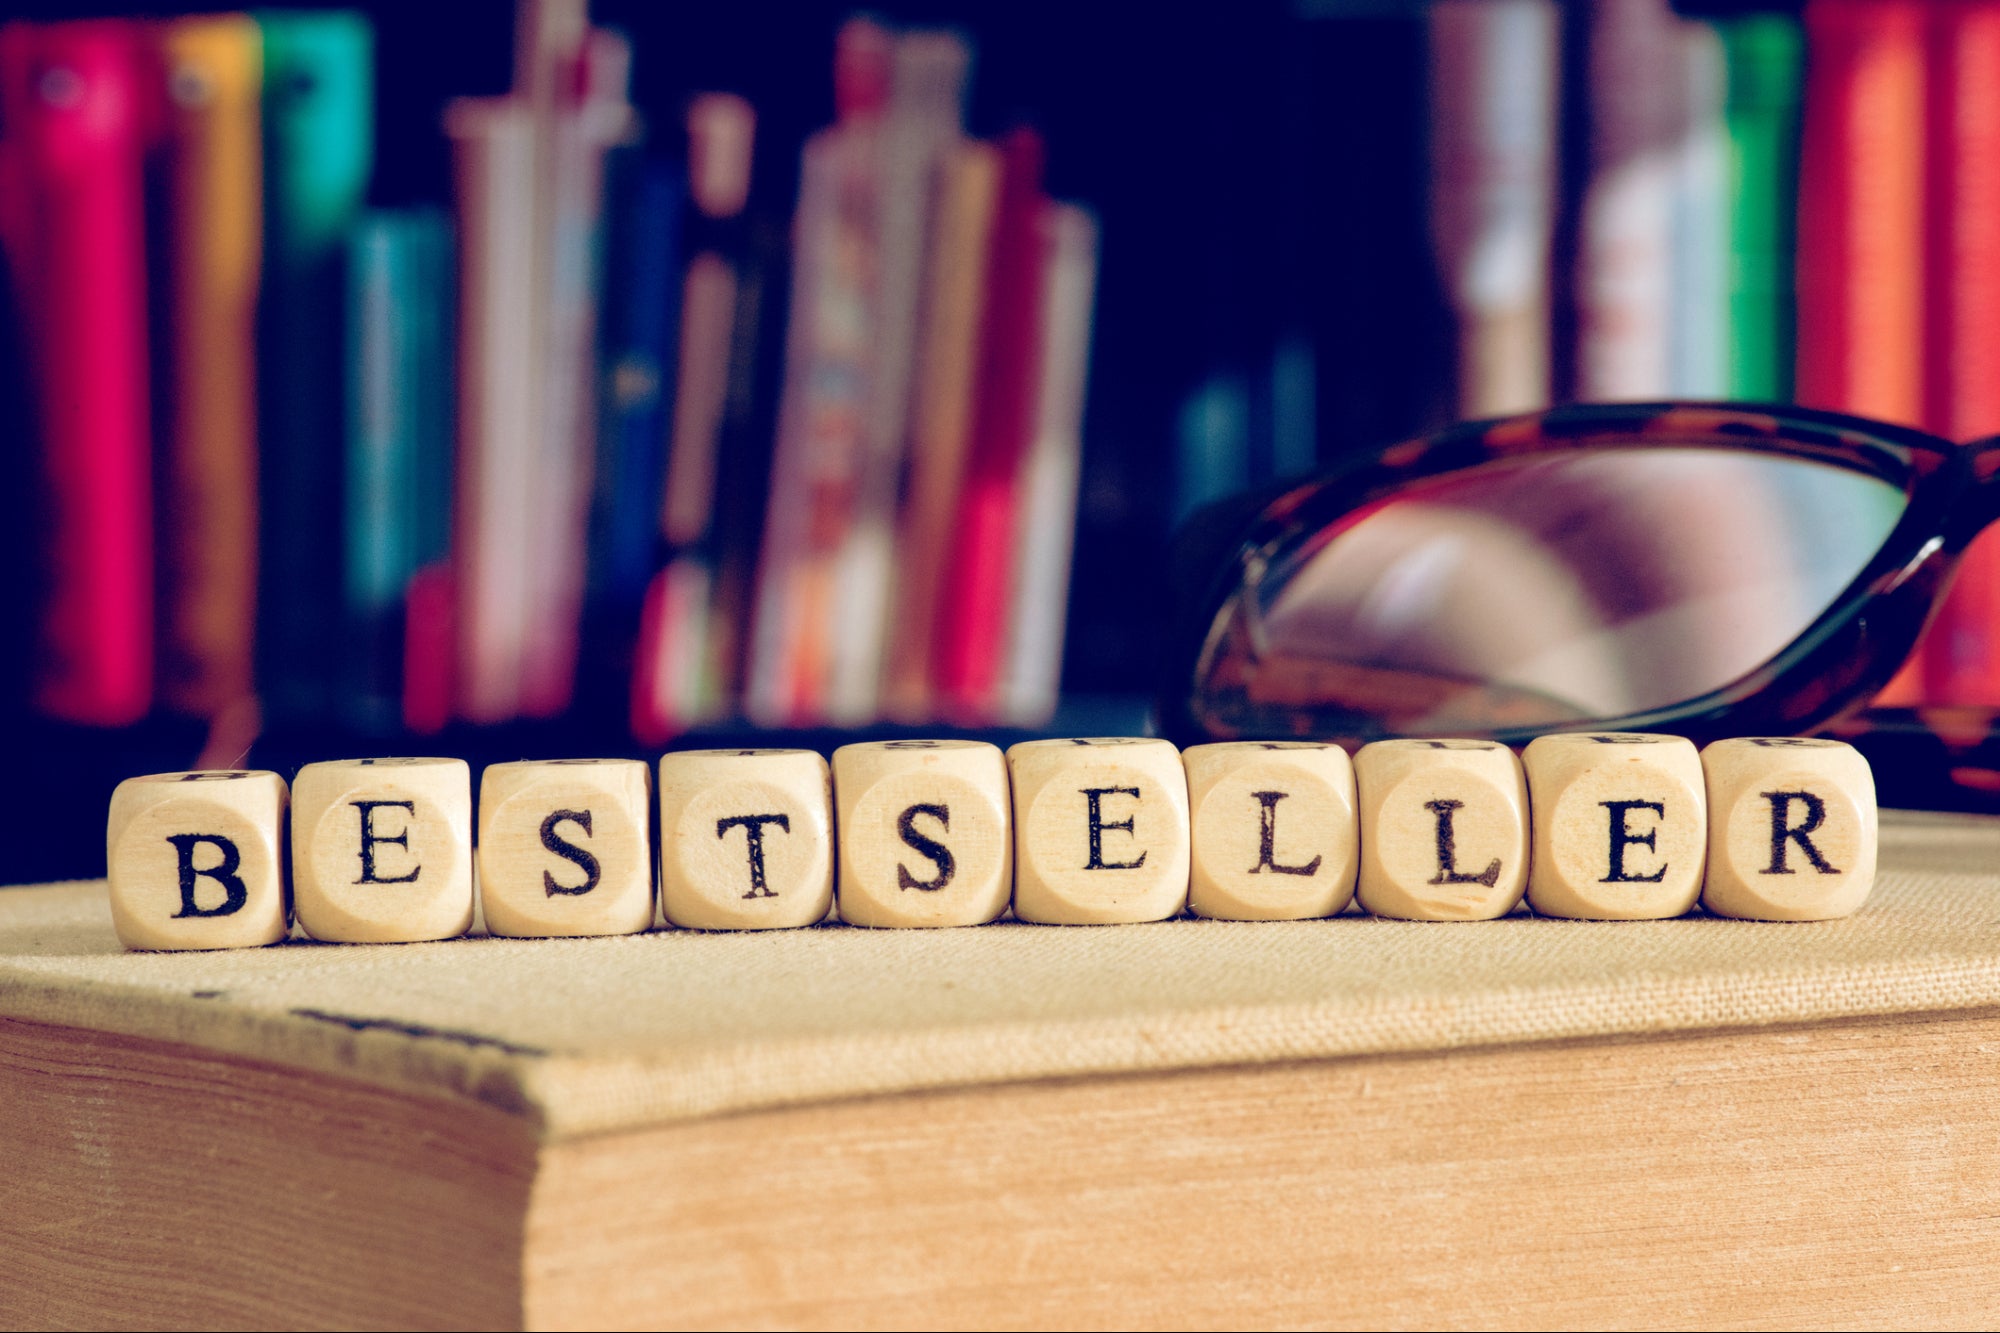 Want Your Book to Land Bestseller Status? Follow These Steps